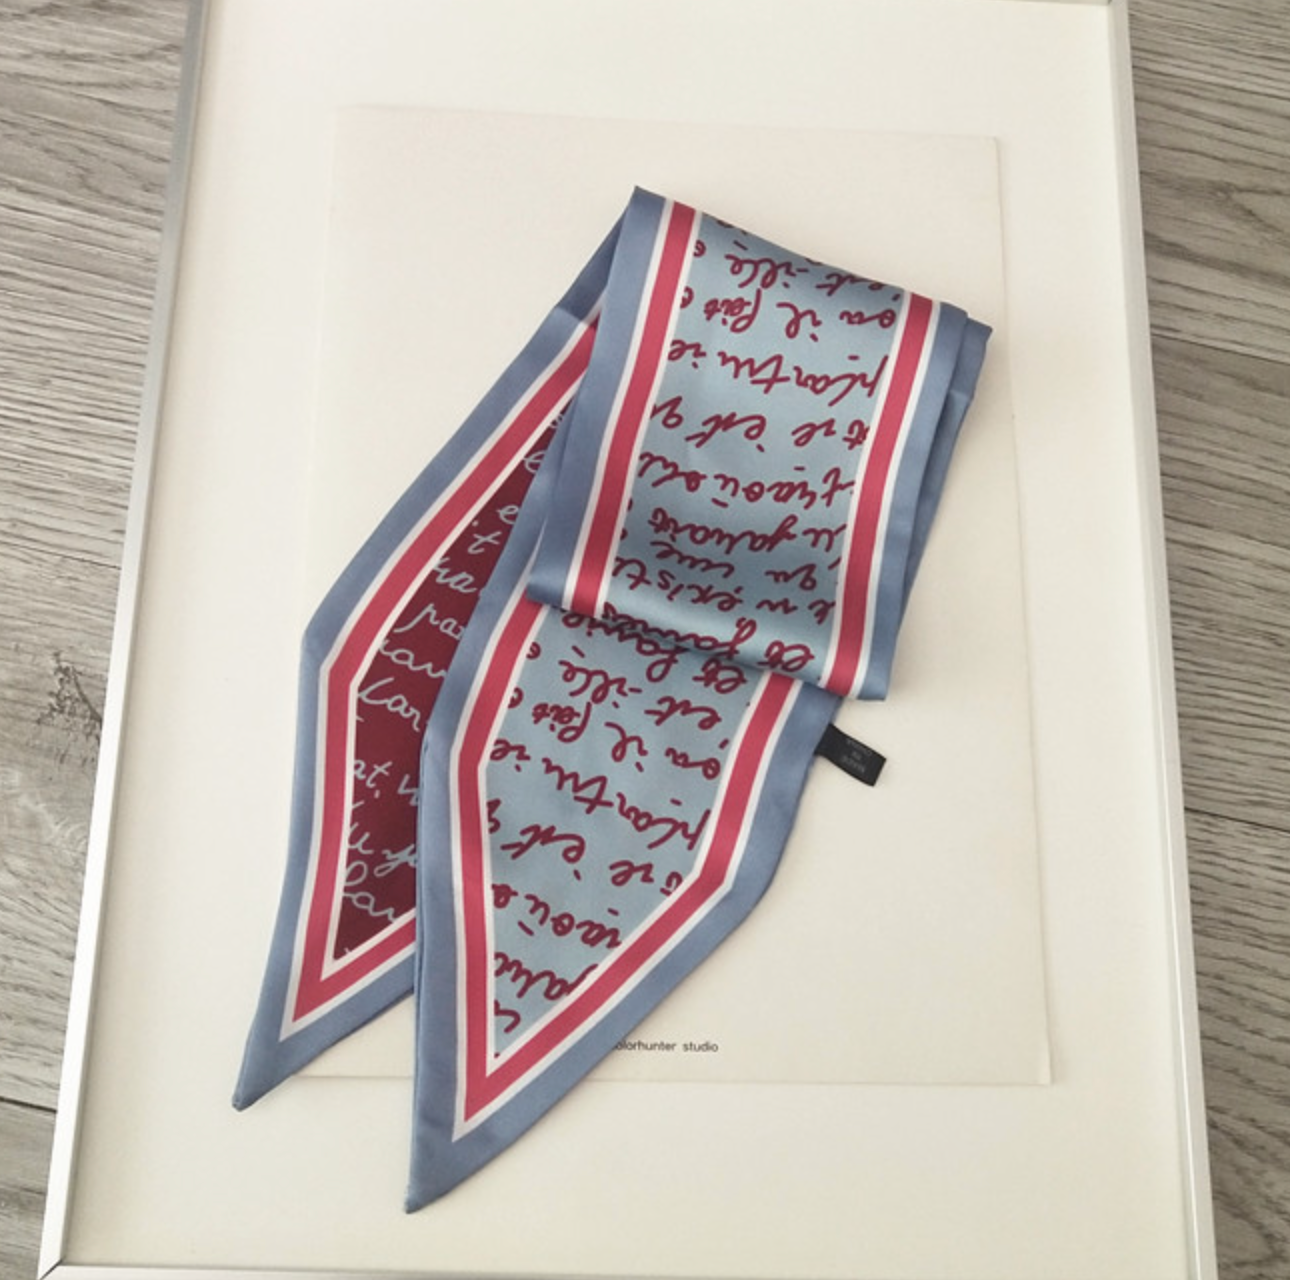 Illustrated Text Colourful Scarf